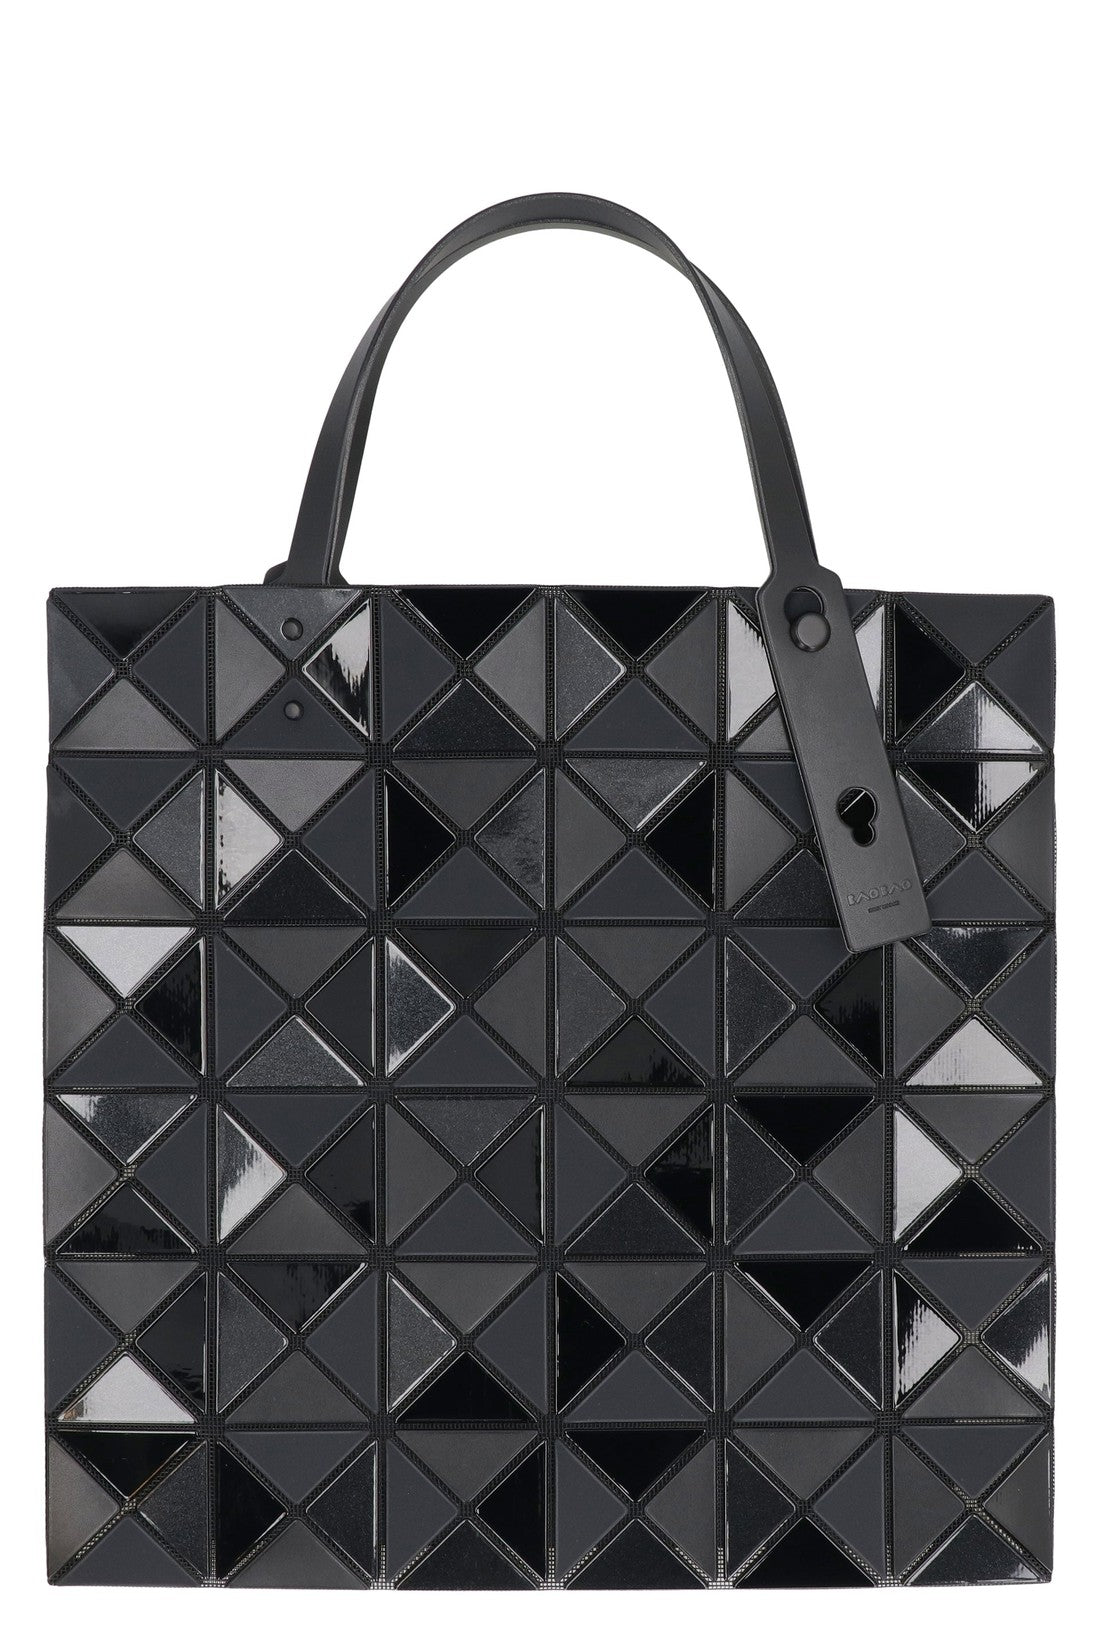 Bao Bao Issey Miyake-OUTLET-SALE-Quatro Tote bag-ARCHIVIST